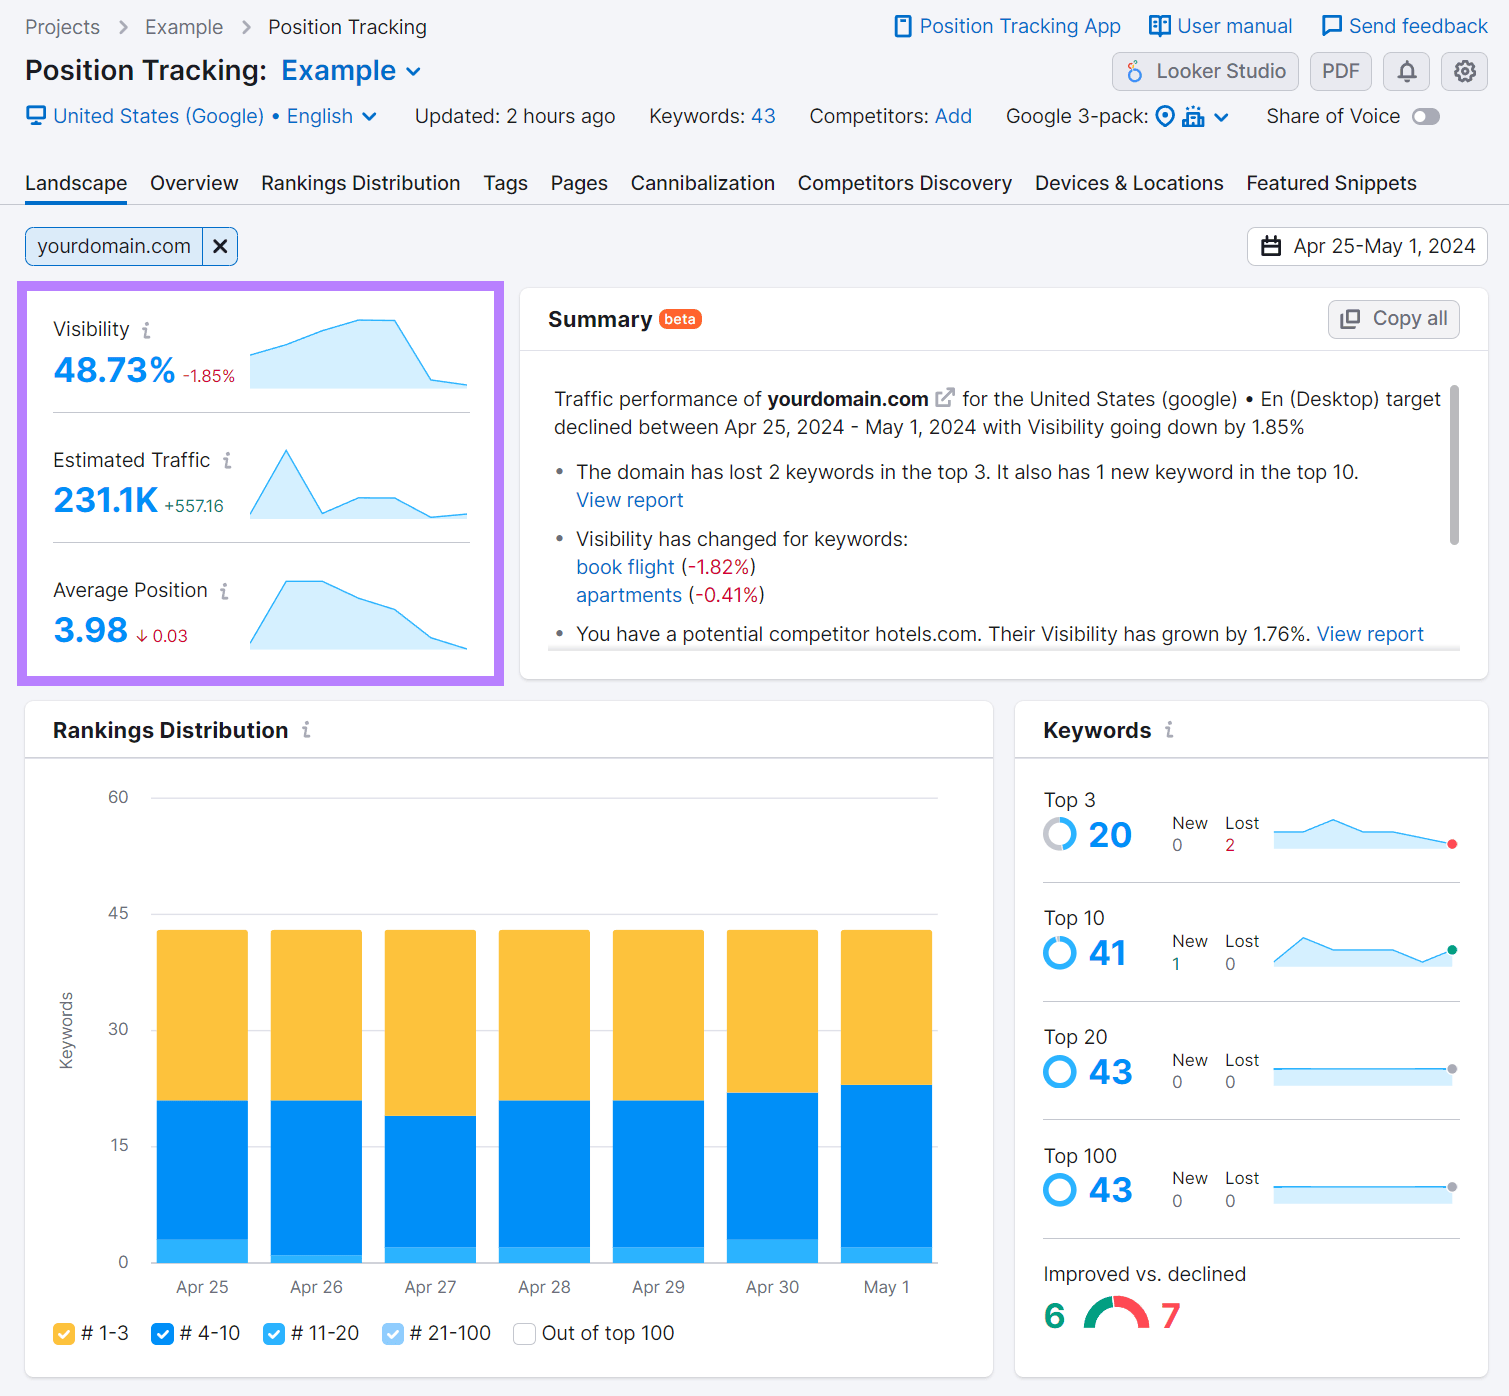 Position Tracking Landscape report with main summary box highlighted showing Visibility, Estimated Traffic, and Average Position.